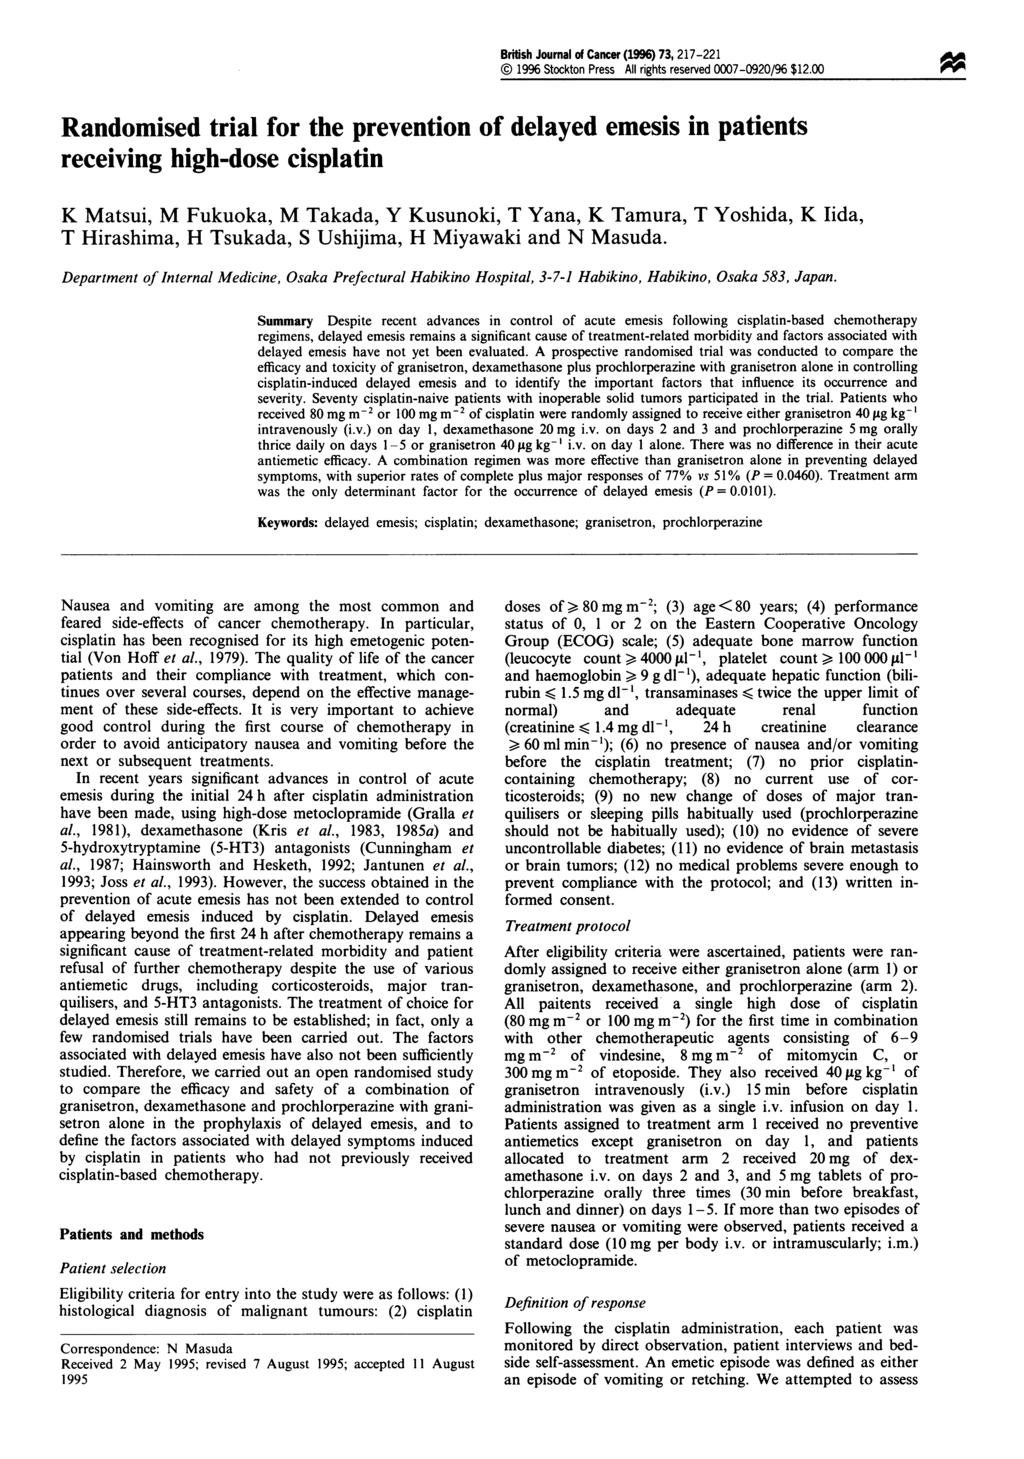 British Journal of Cancer (1996) 73, 217-221 1996 Stockton Press All rights reserved 0007-0920/96 $12.